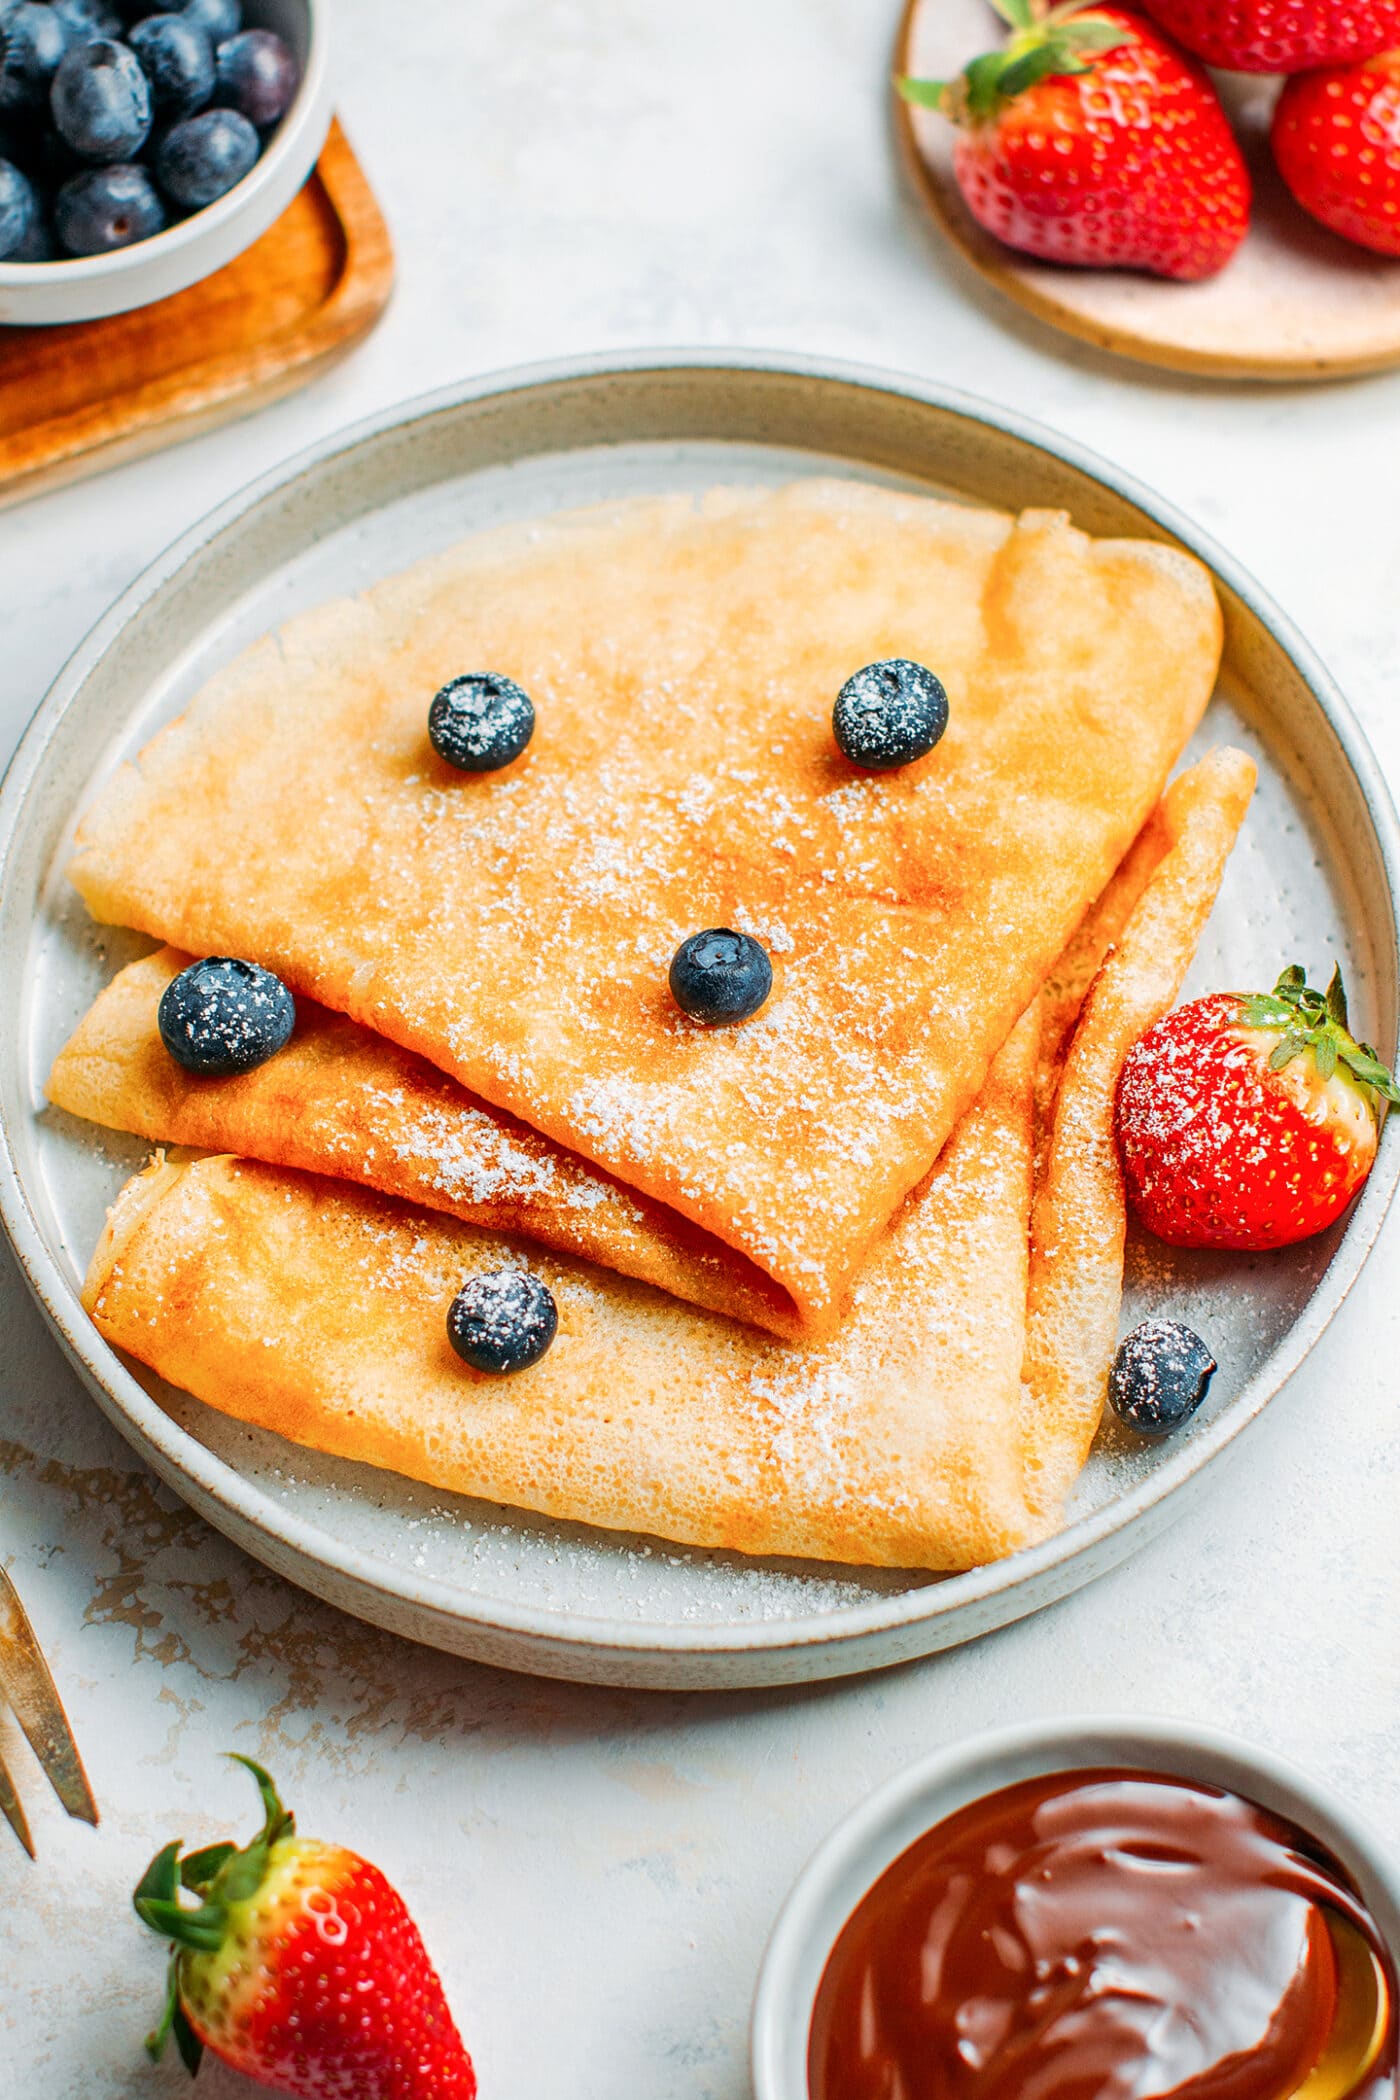 Vegan French crêpes with powdered sugar, blueberries, and strawberries.